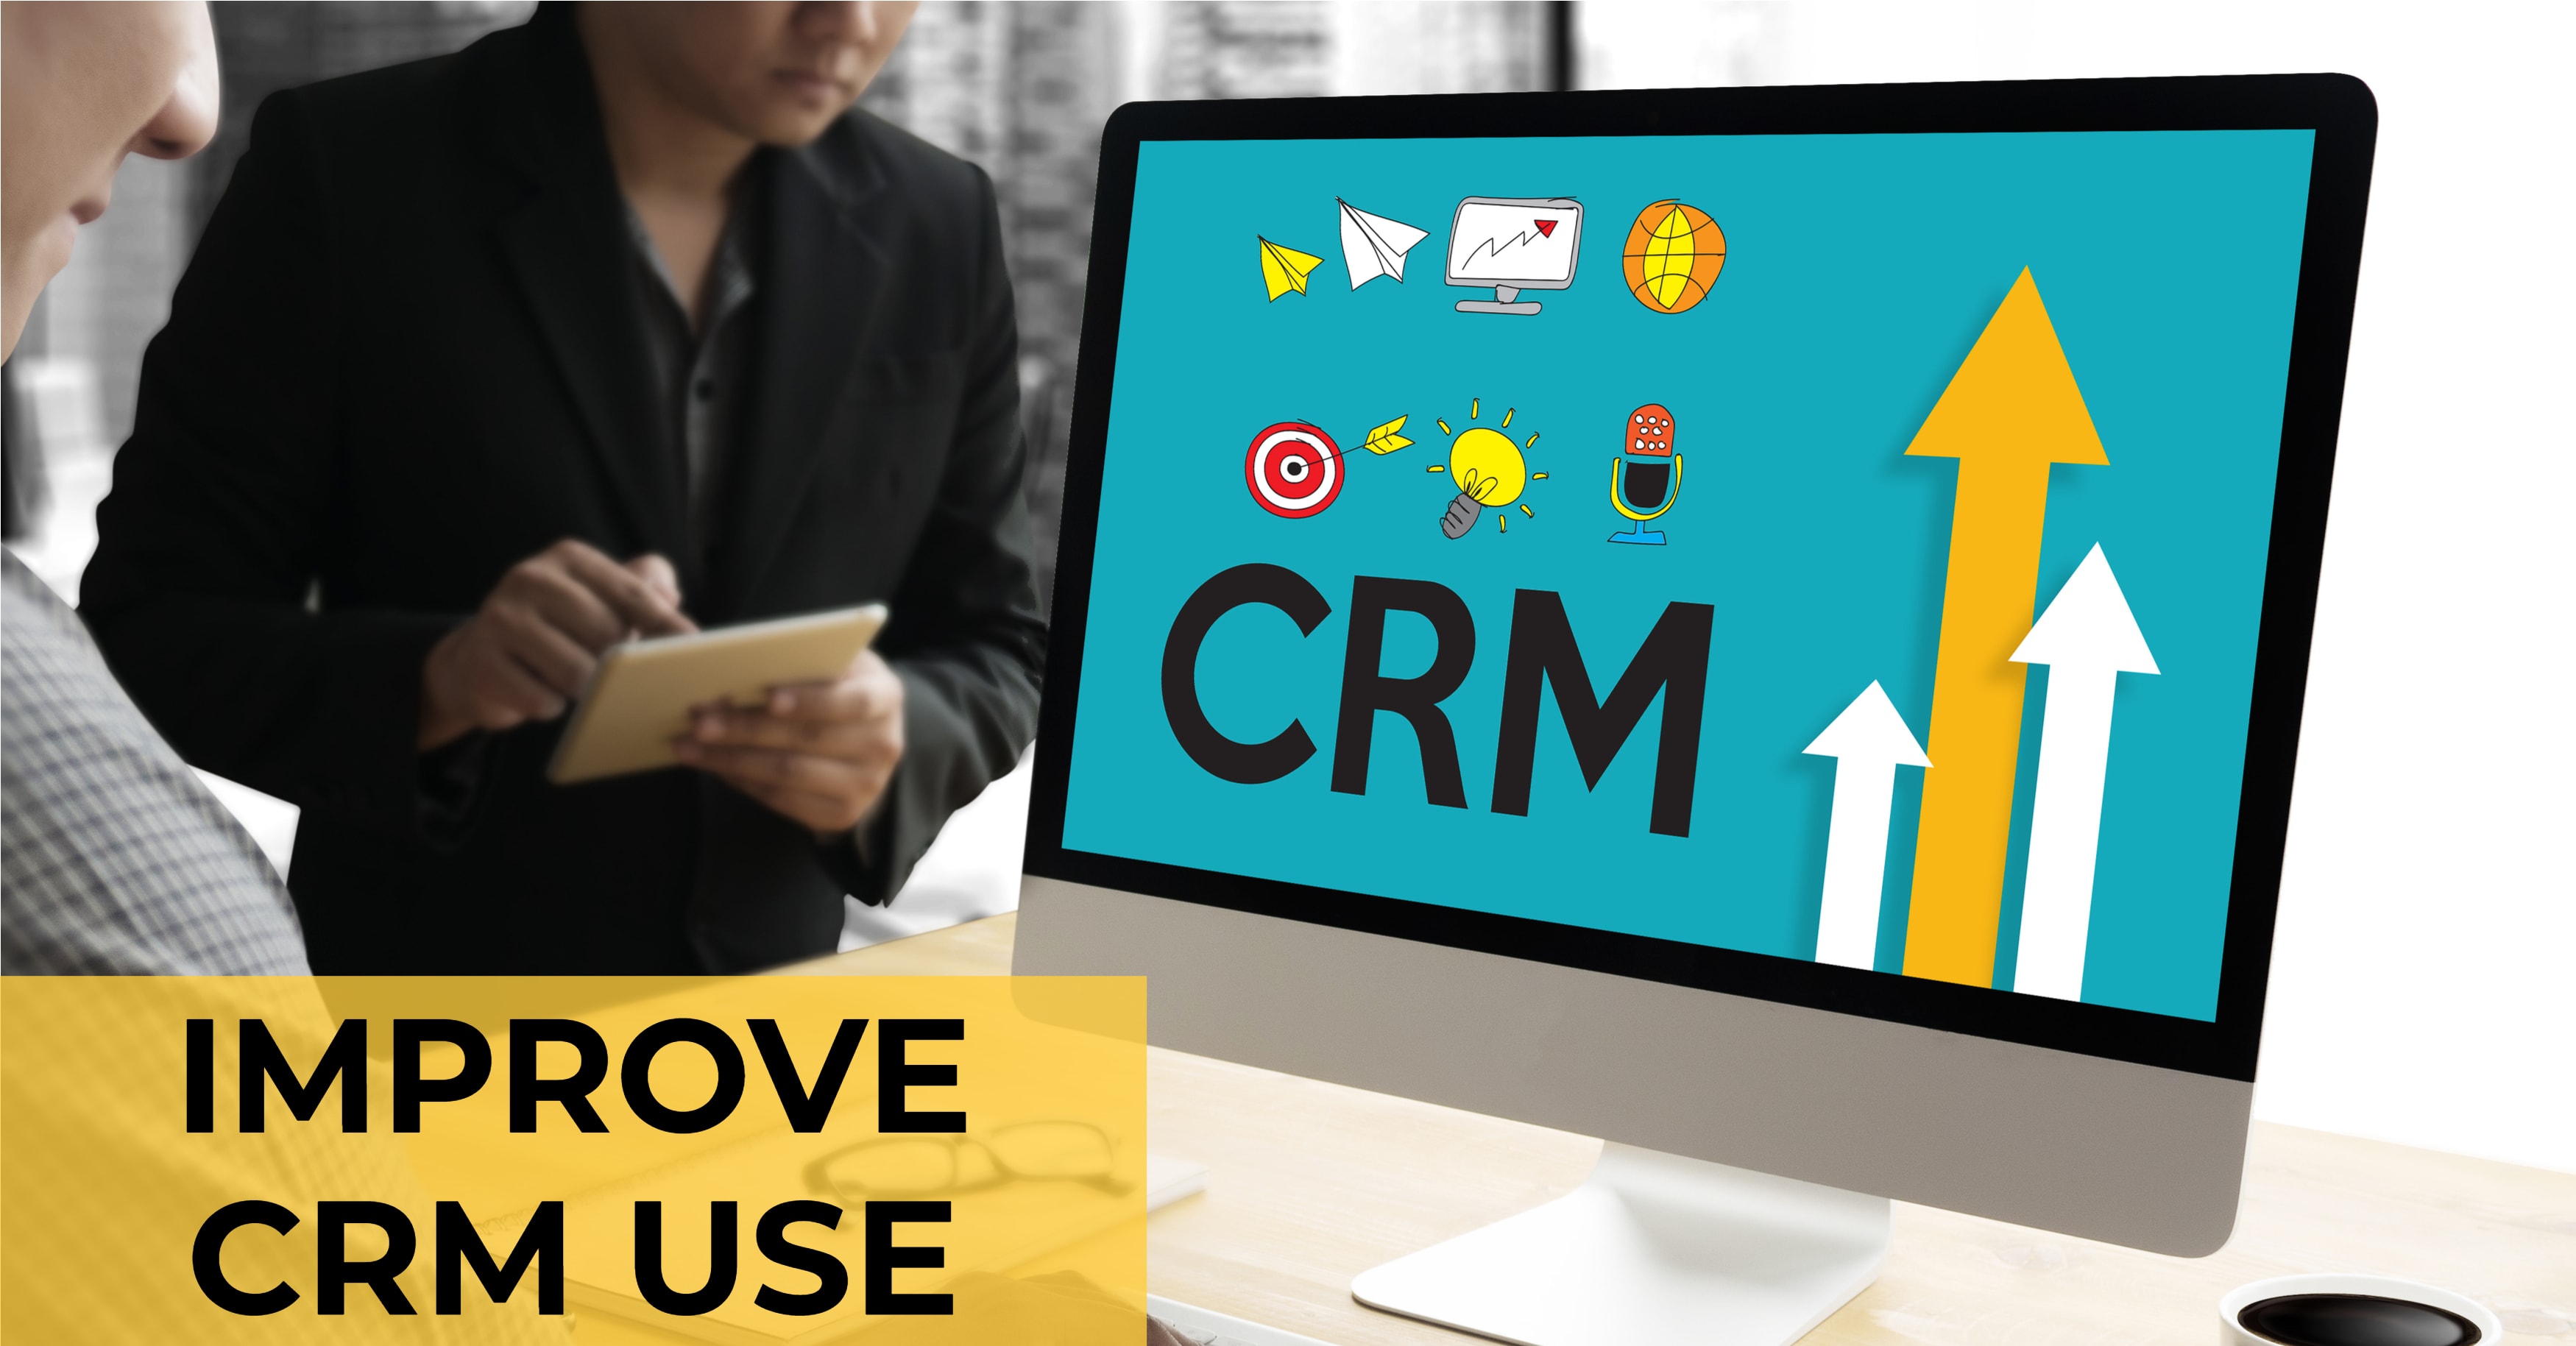 3 Tips for Improving CRM Use